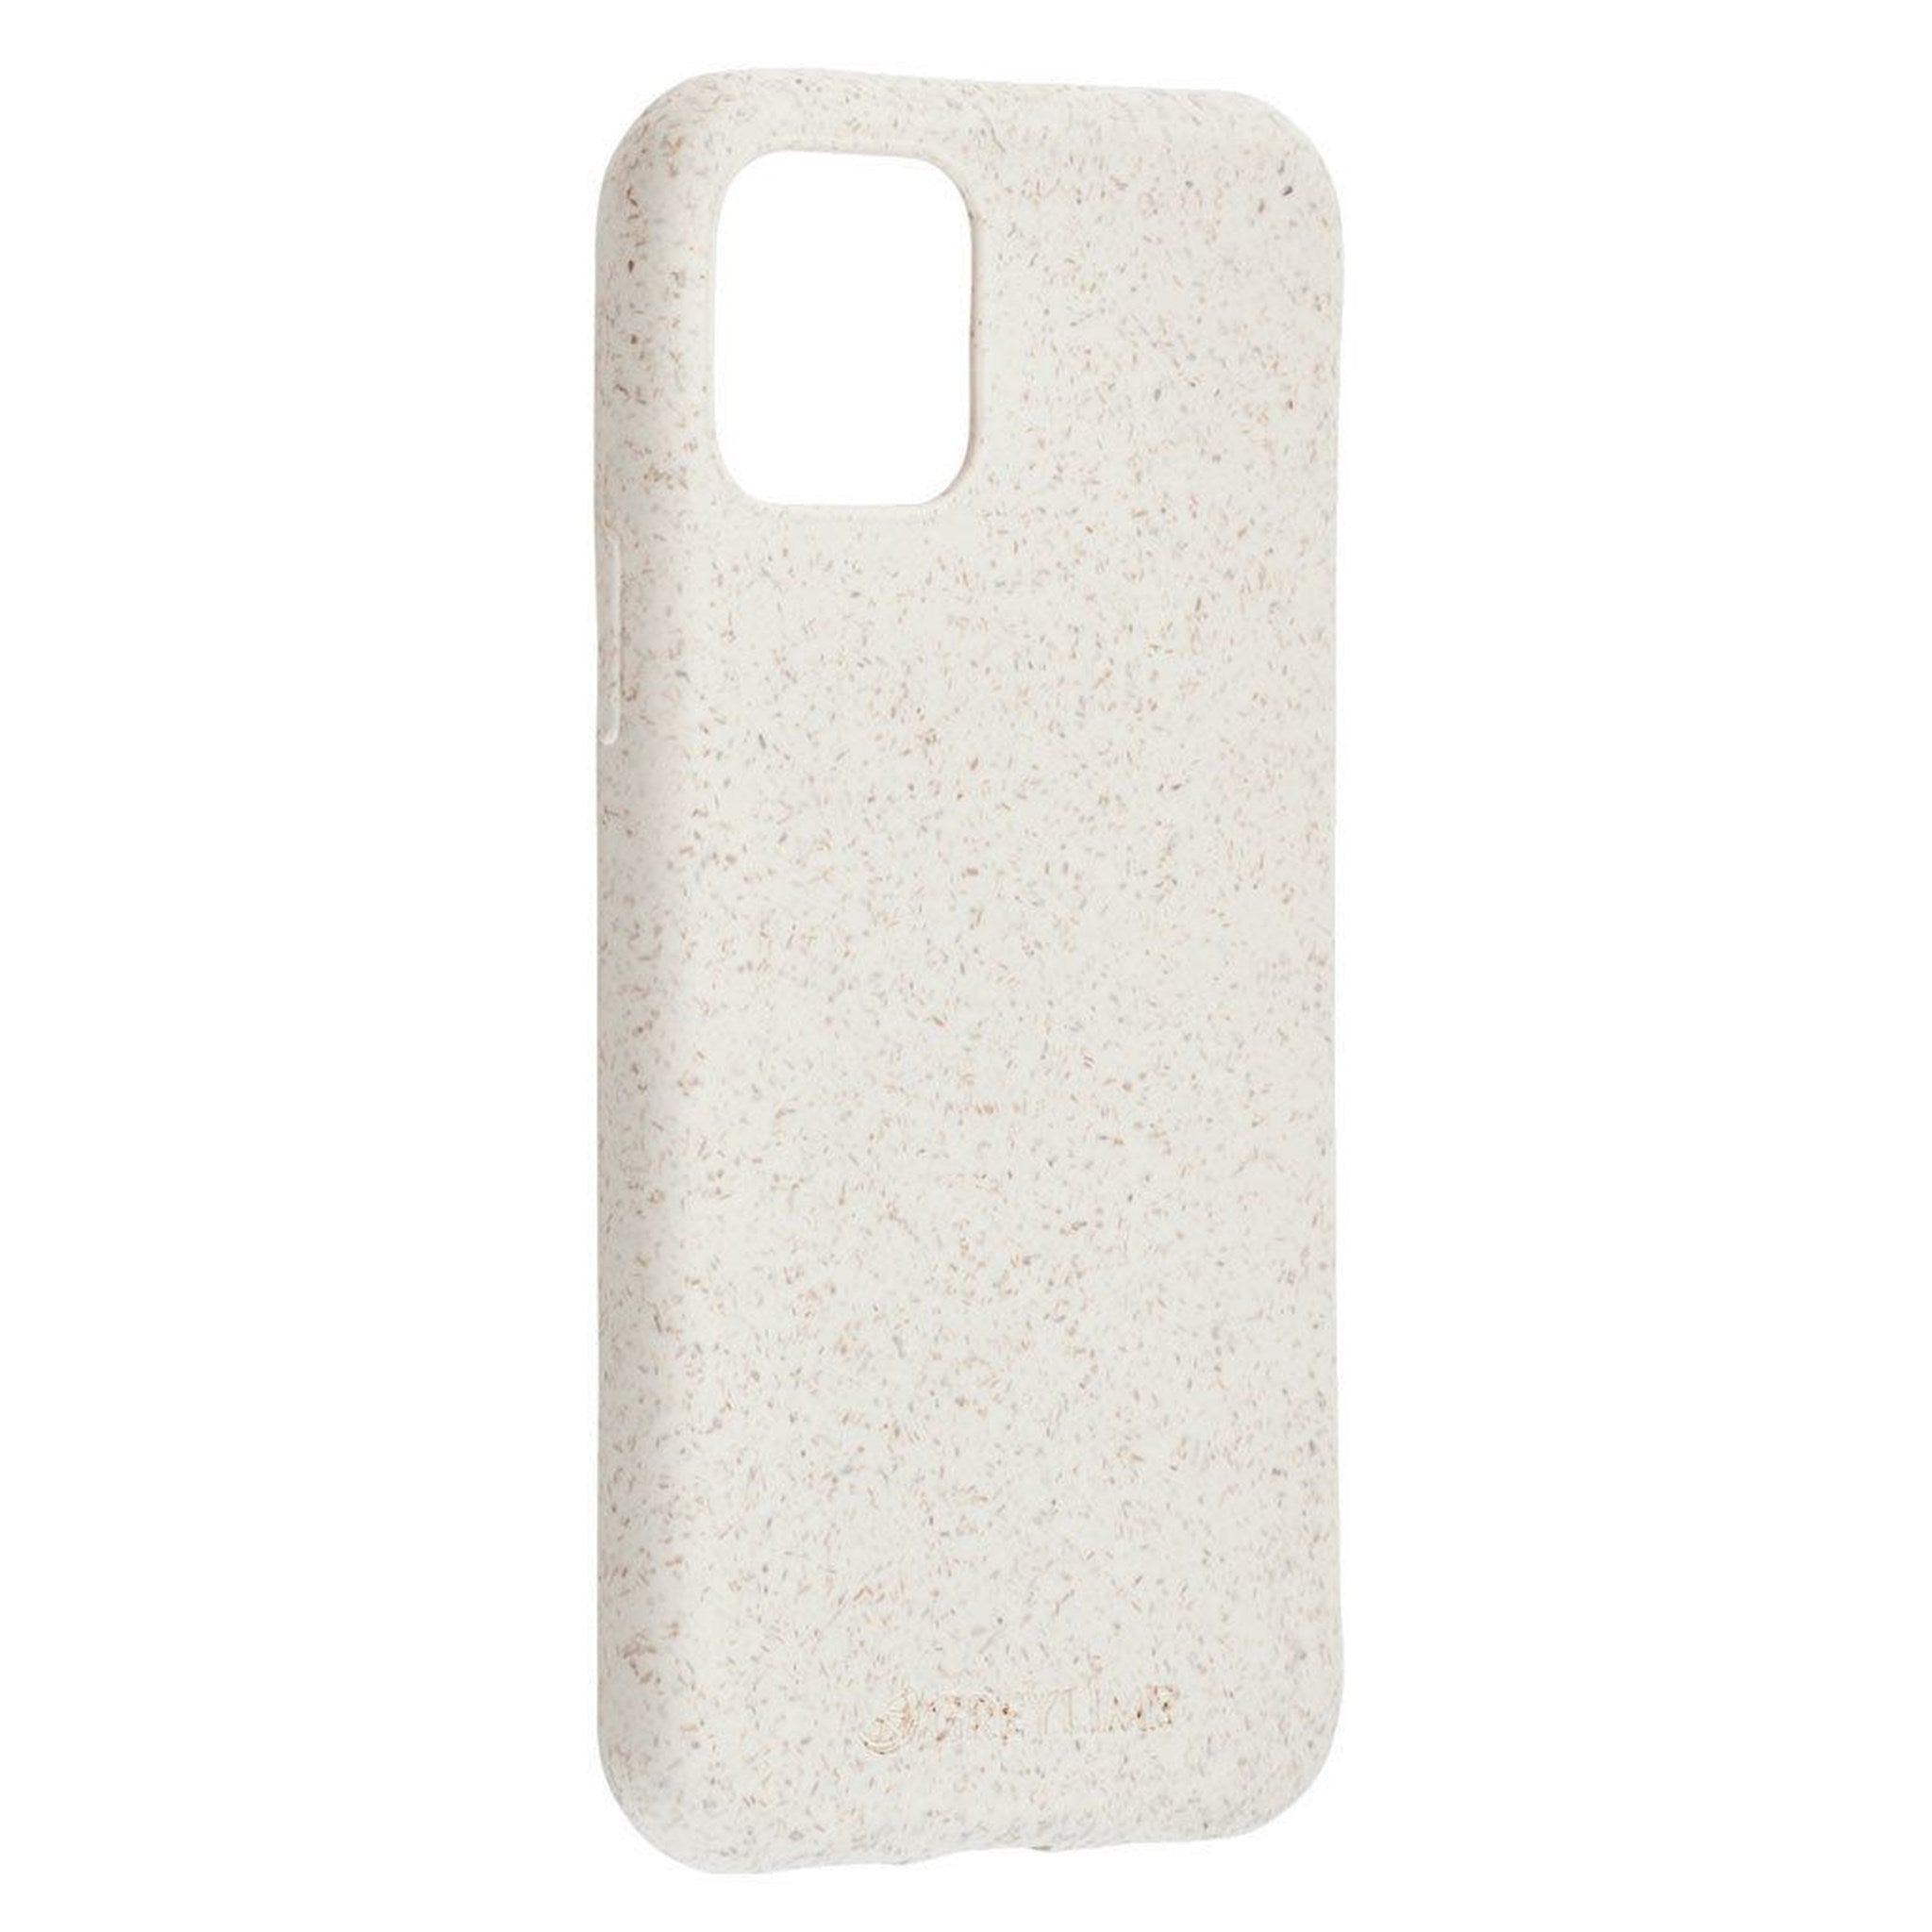 GreyLime-iPhone-11-Pro-biodegradable-cover-Beige-COIP11P02-V1.jpg